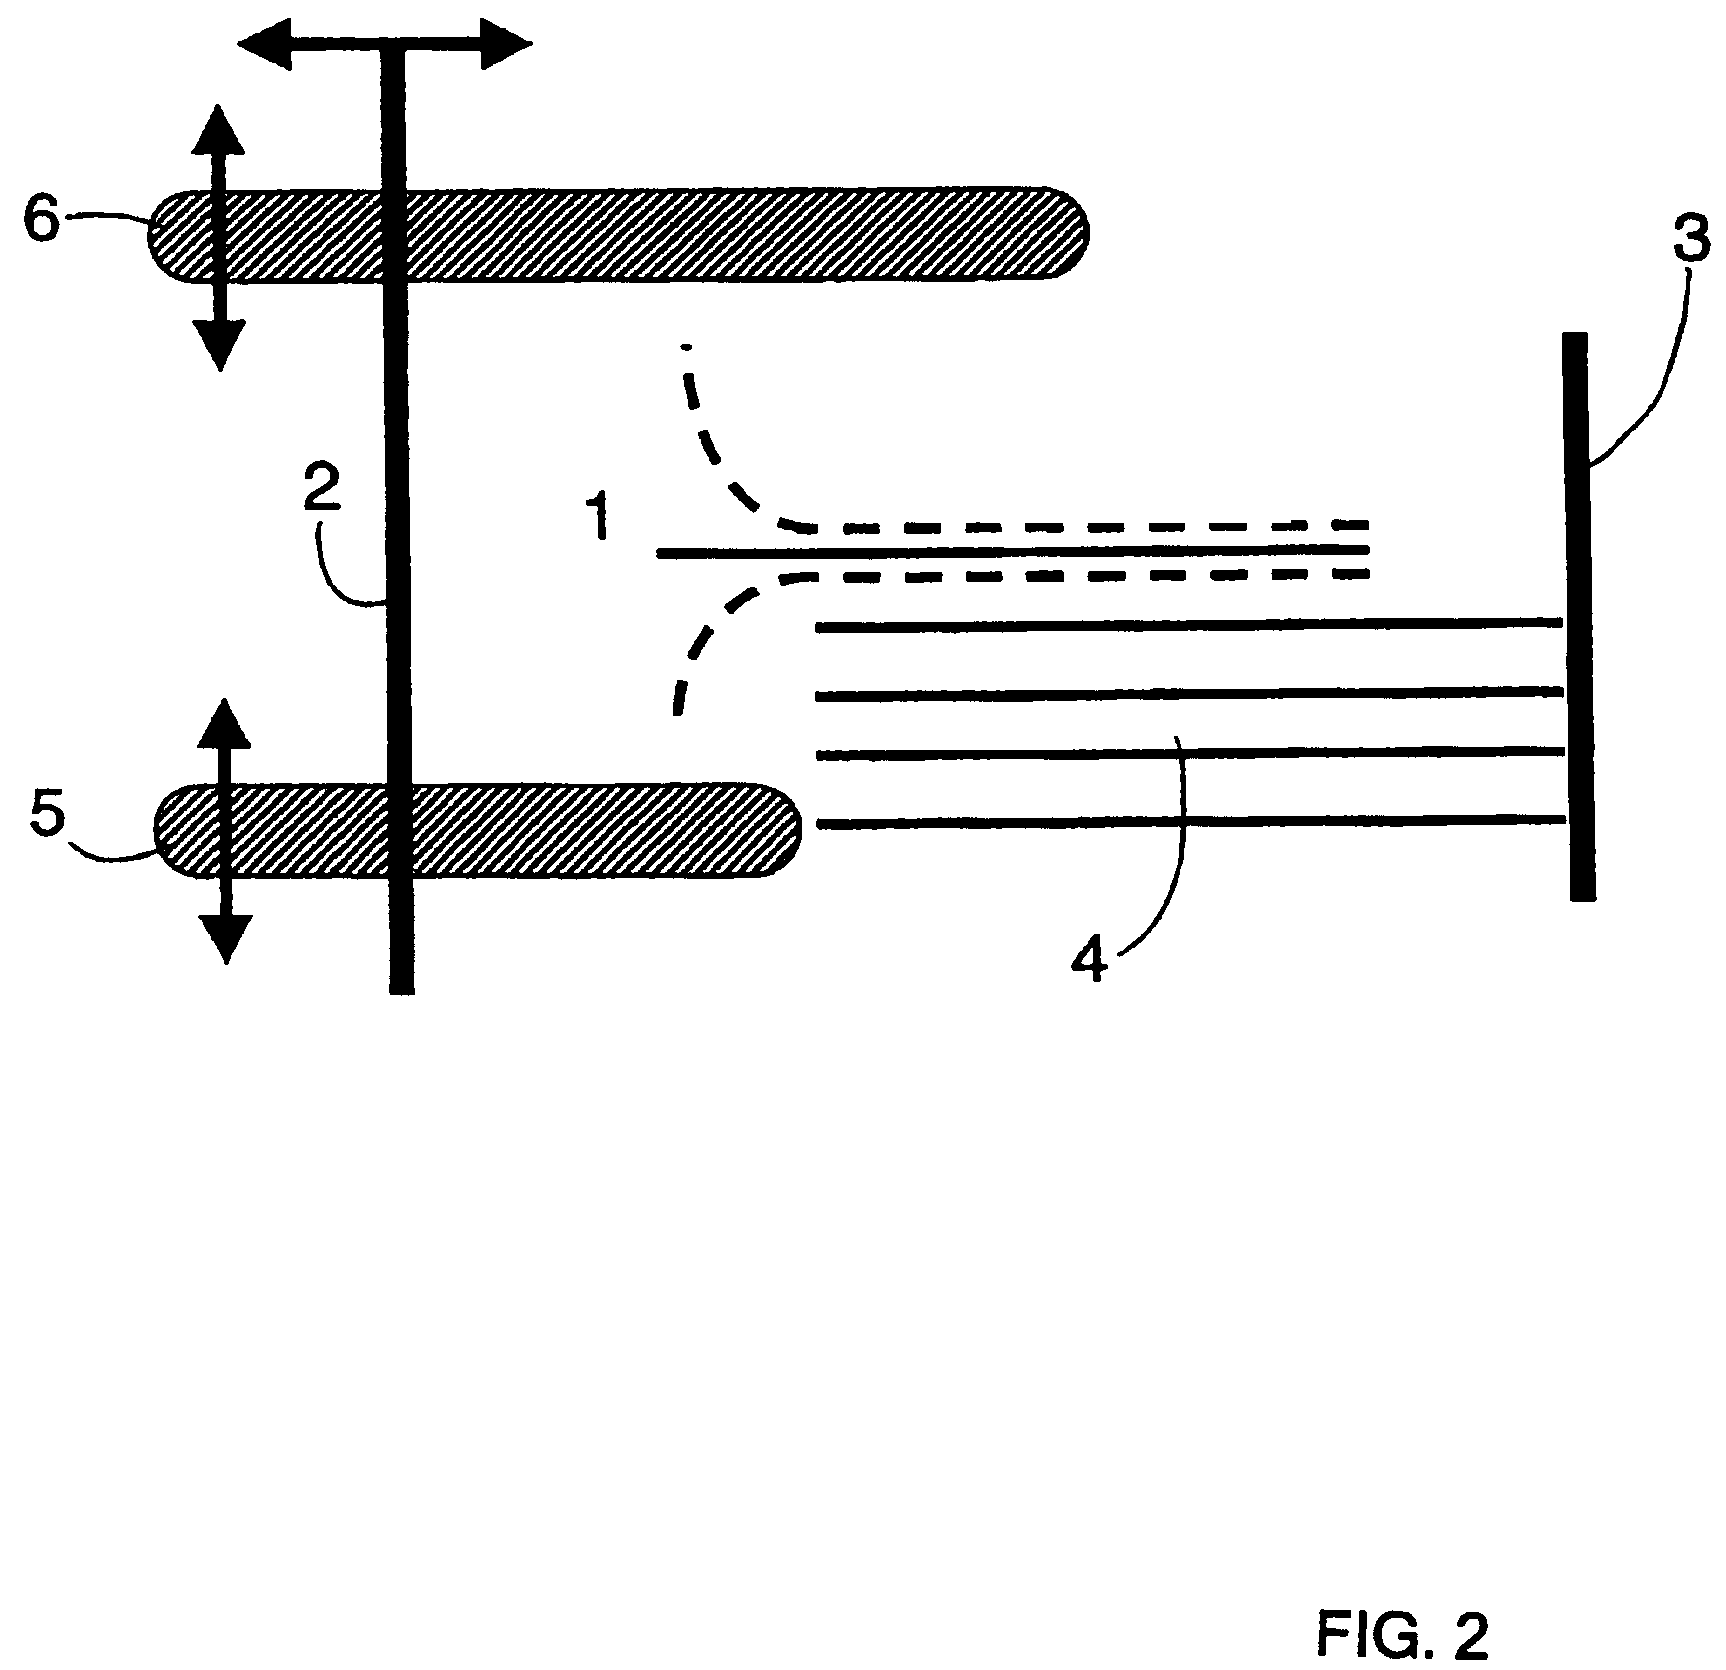 Device and method for forming a stack of sheets on a delivery surface